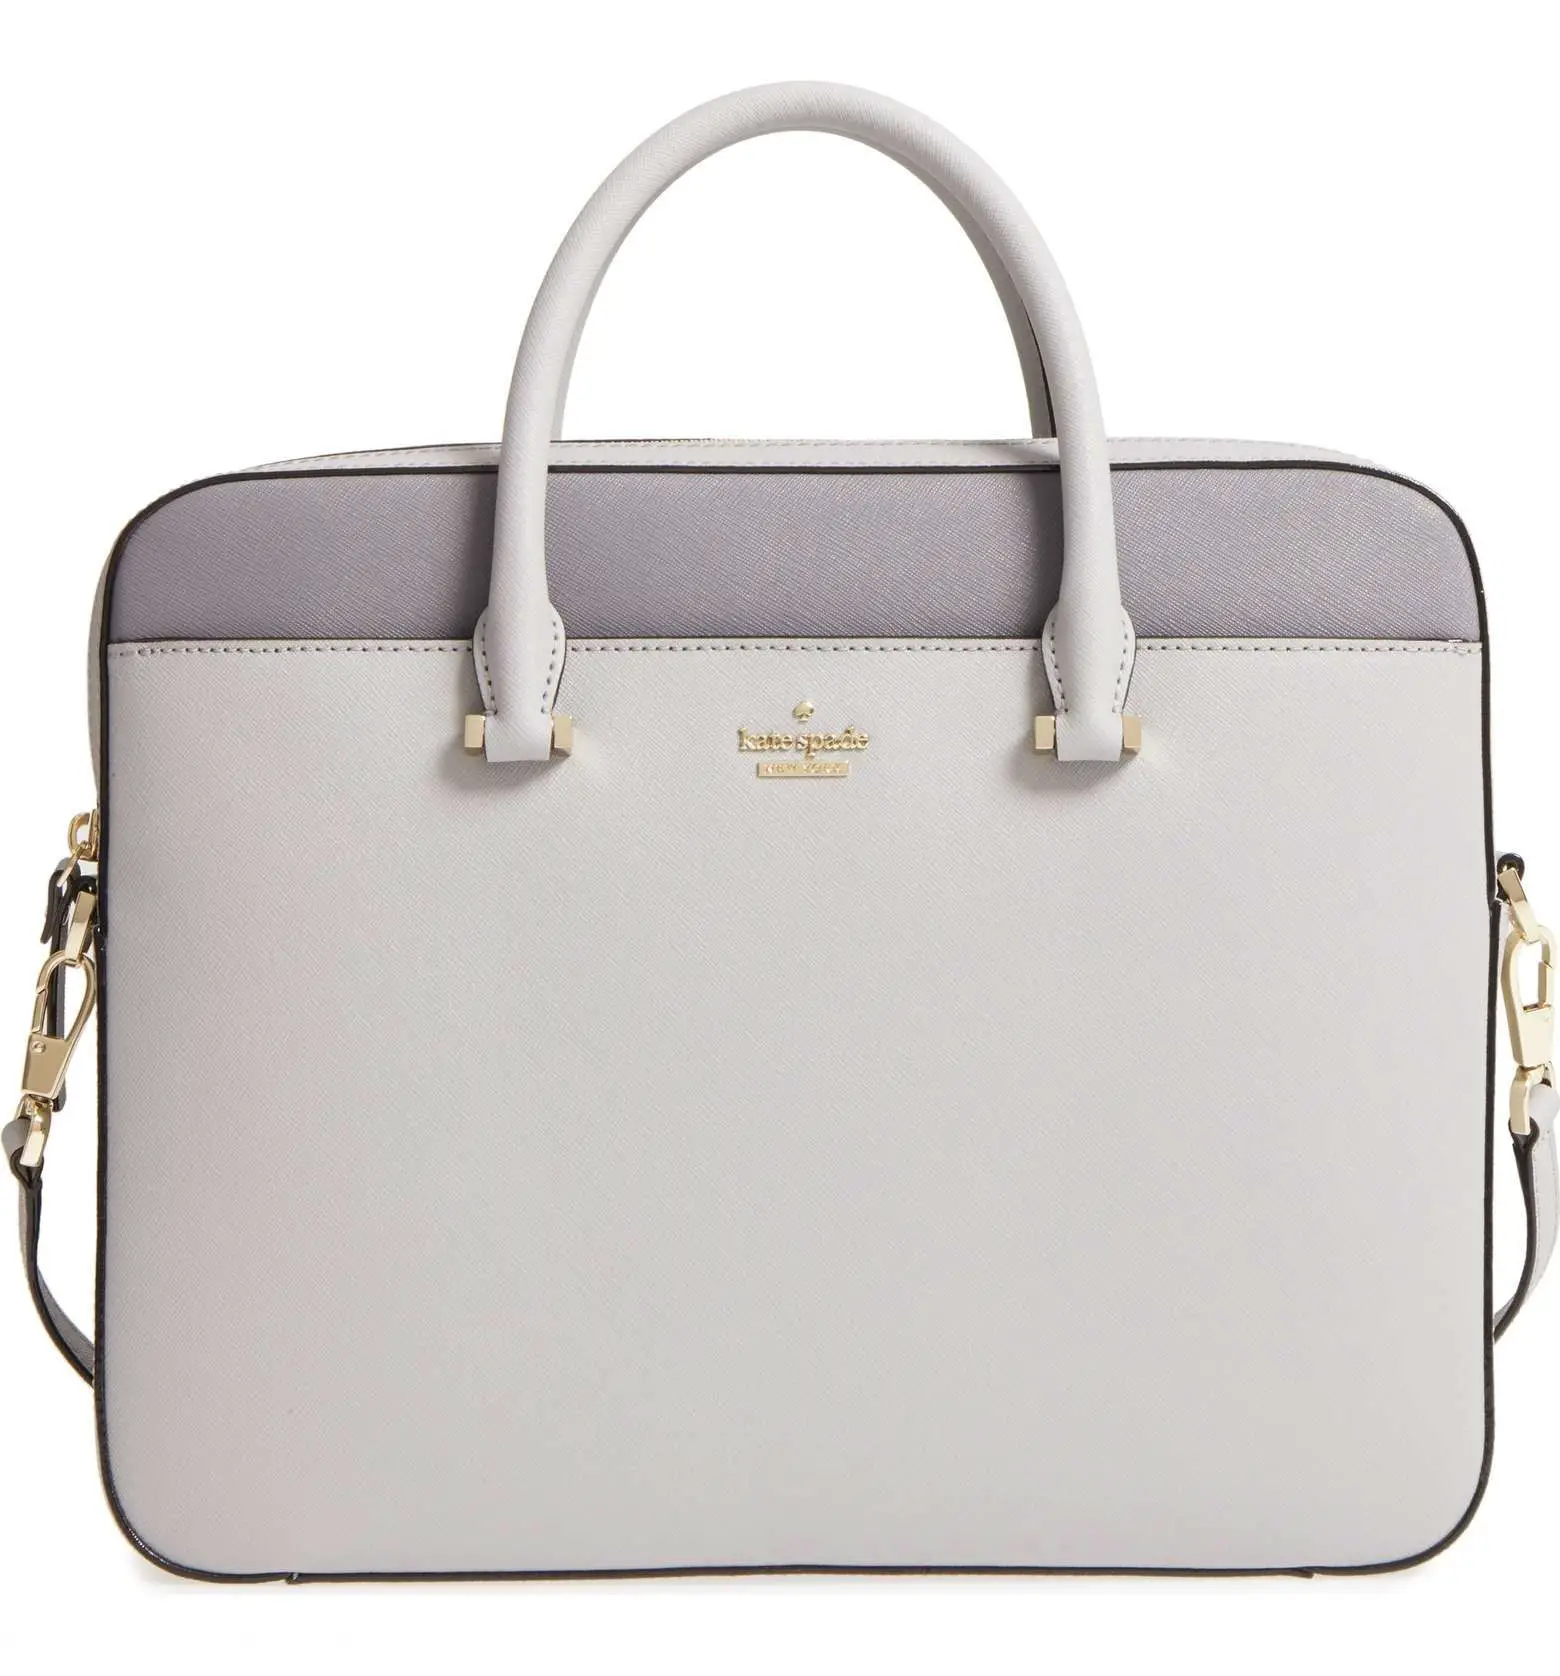 5 Types Of Handbags Every Woman Should Have